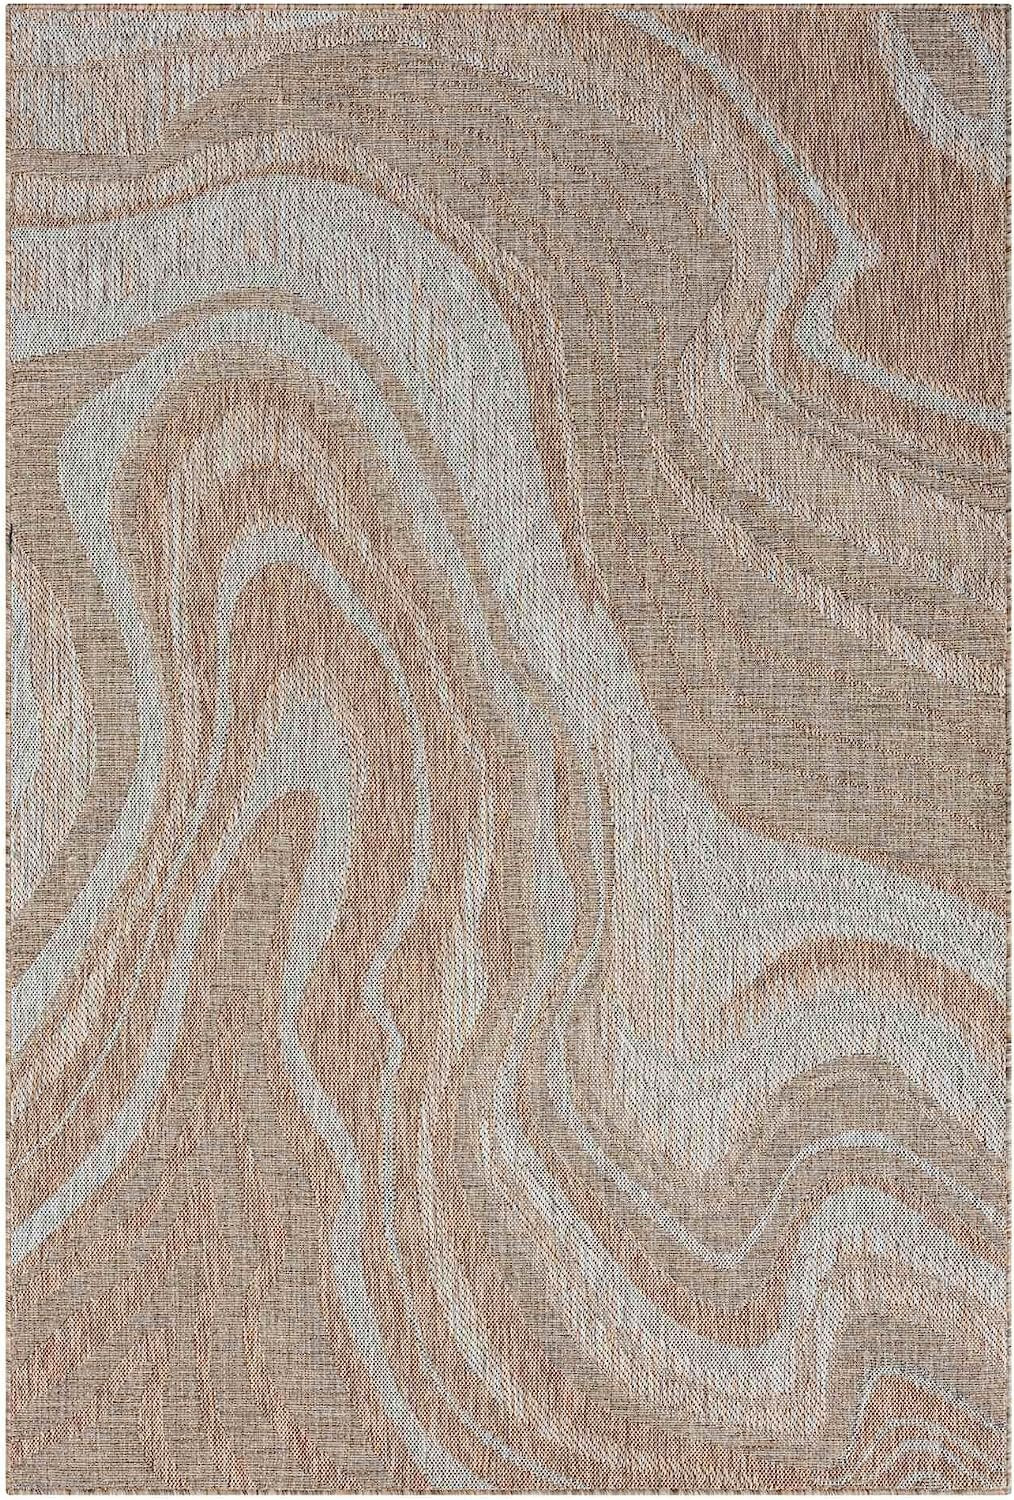 HR Waterproof Ocean Pattern Abstract Outdoor Rug - Stain and Fade-Resistant-#1661